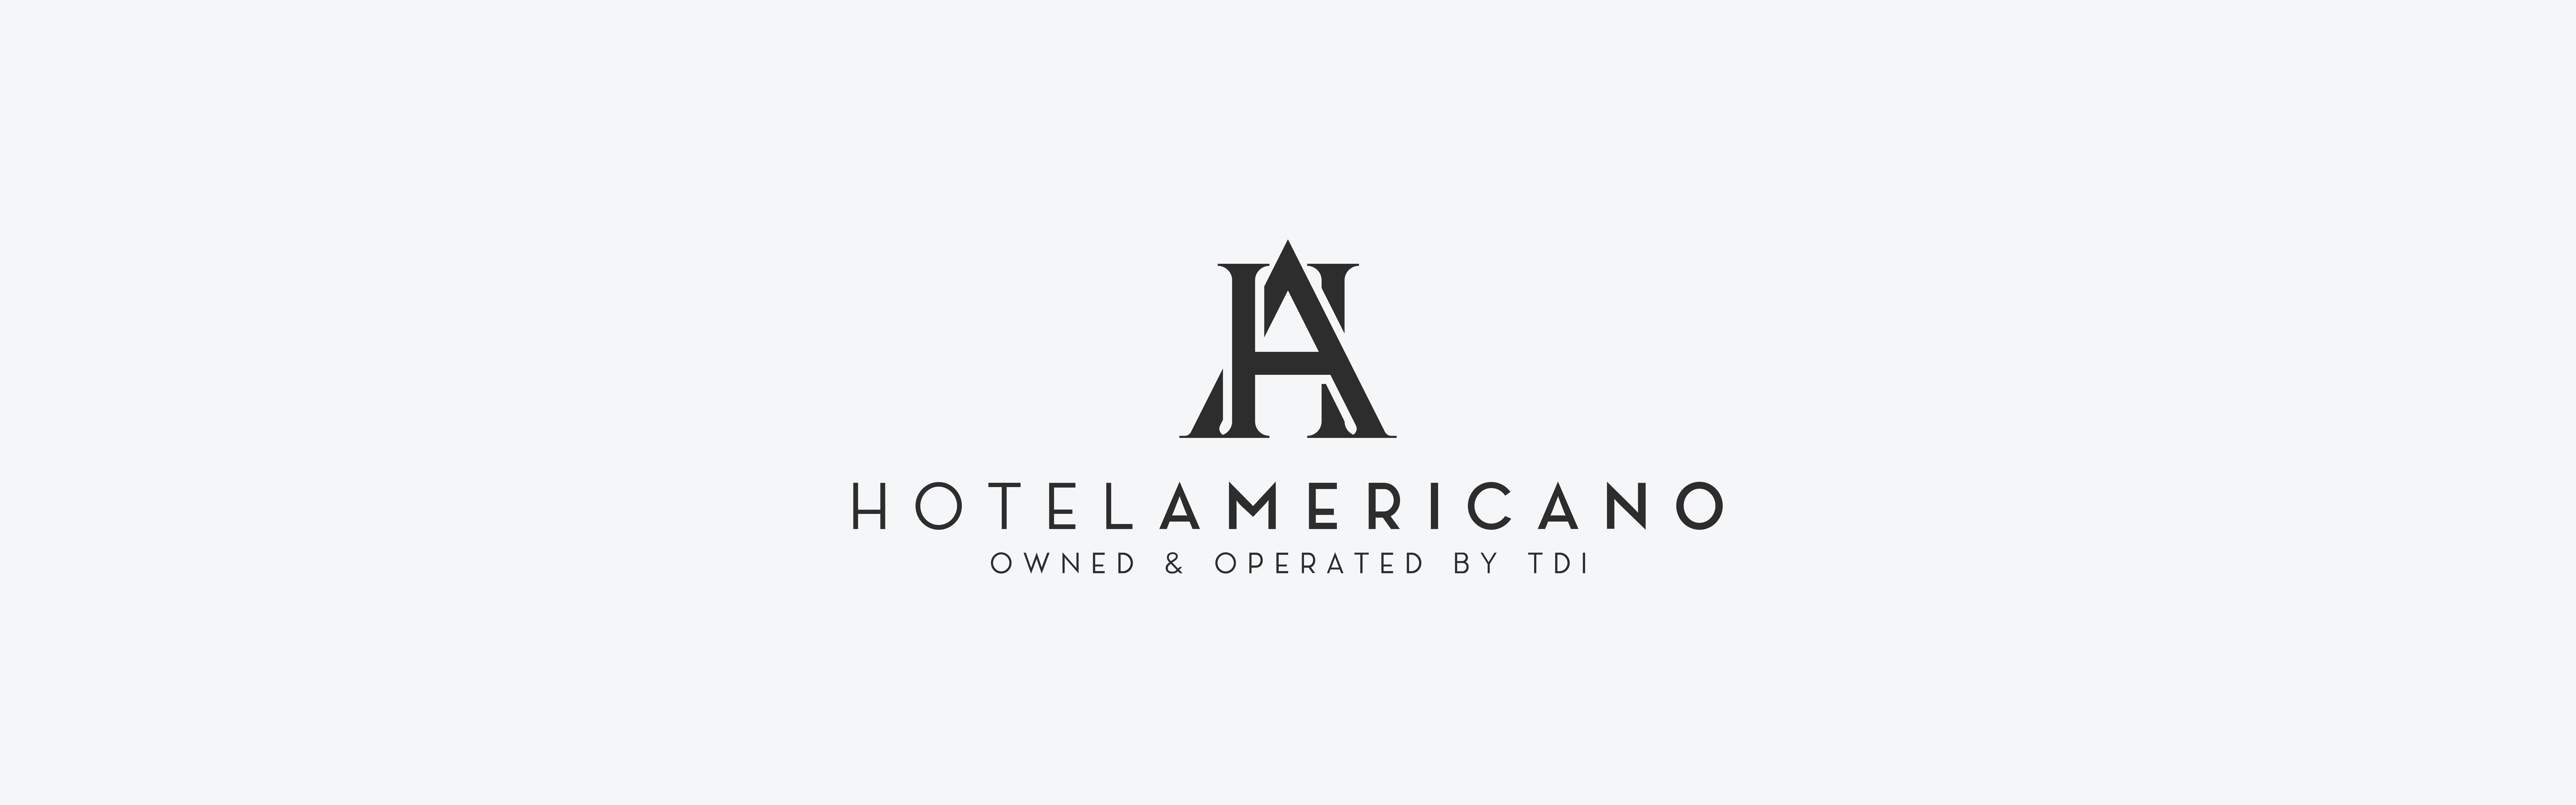 A logo consisting of the letters 'ha' in a stylized fashion, accompanied by the text "Hotel Americano" underneath and a smaller line of text stating "owned & operated by tdi.